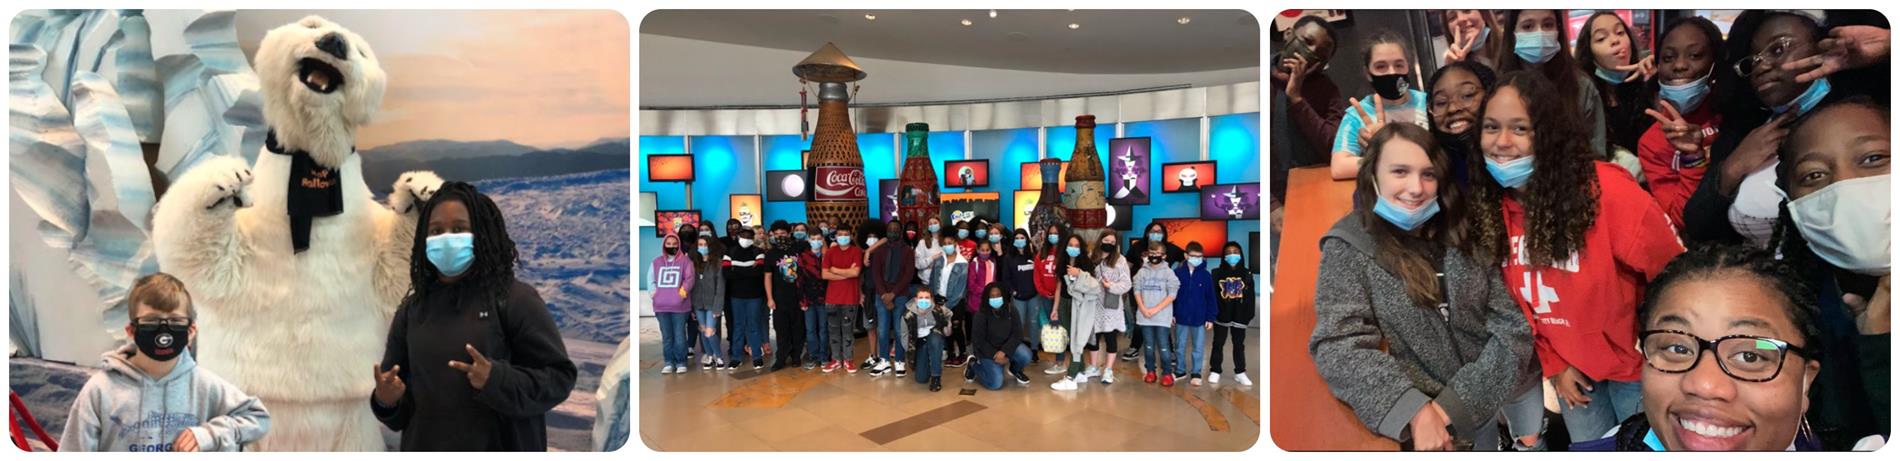 Students at the World of Coke